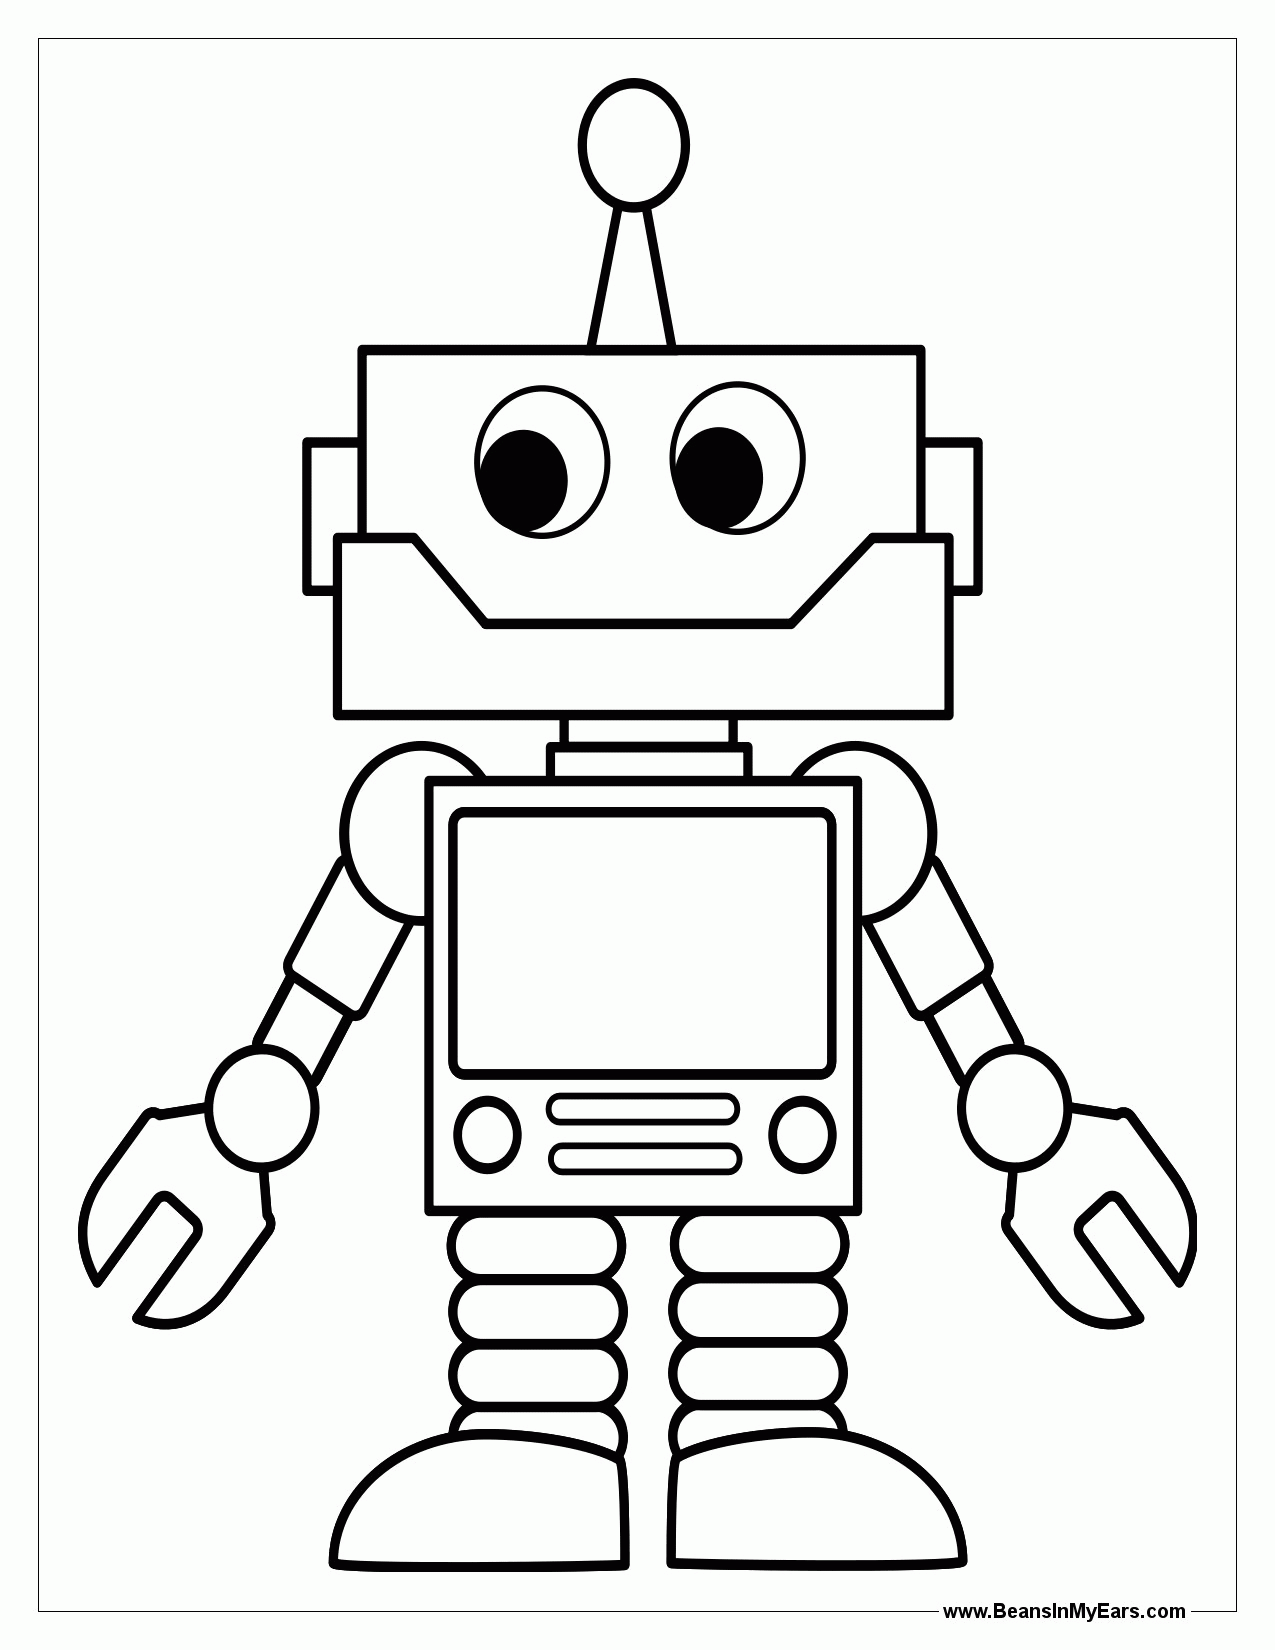 colouring pages robots | Colouring